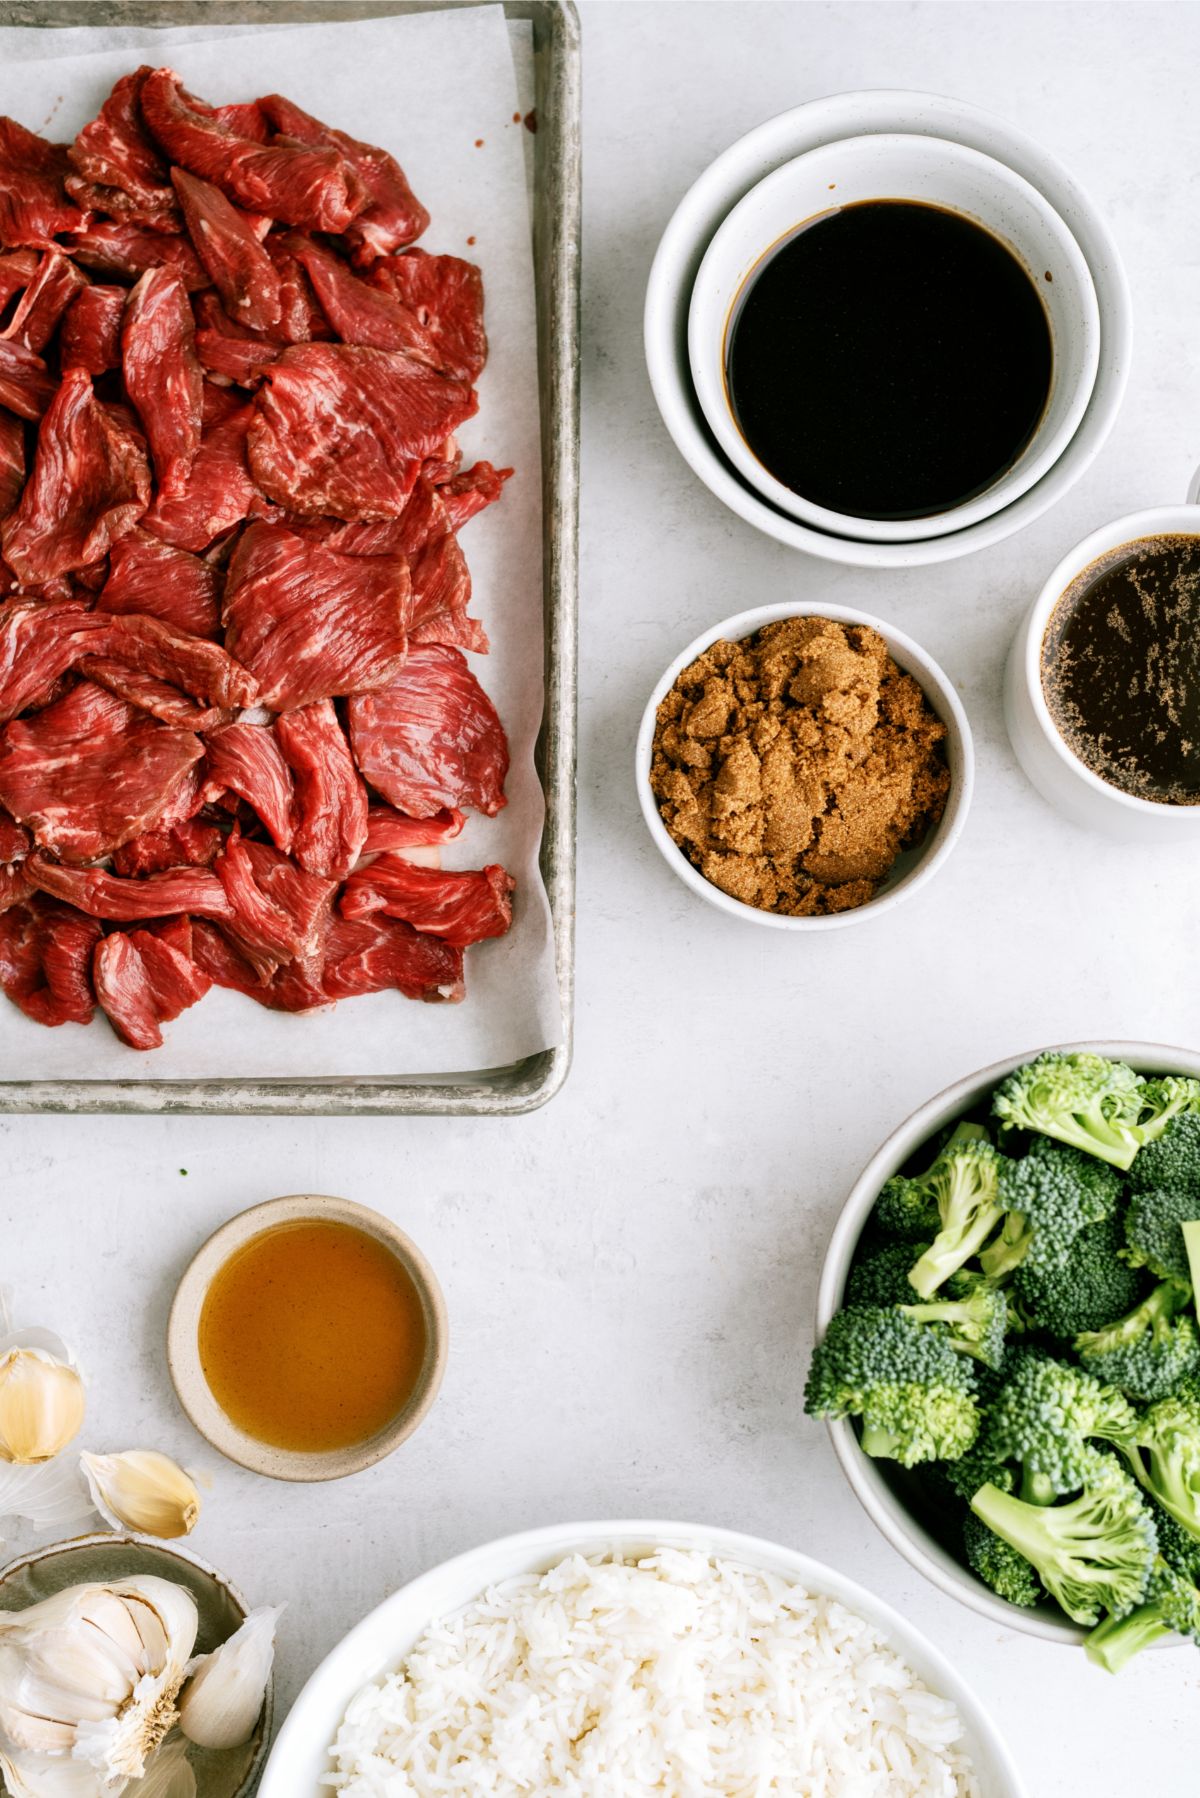 Ingredients needed to make Slow Cooker Beef and Broccoli